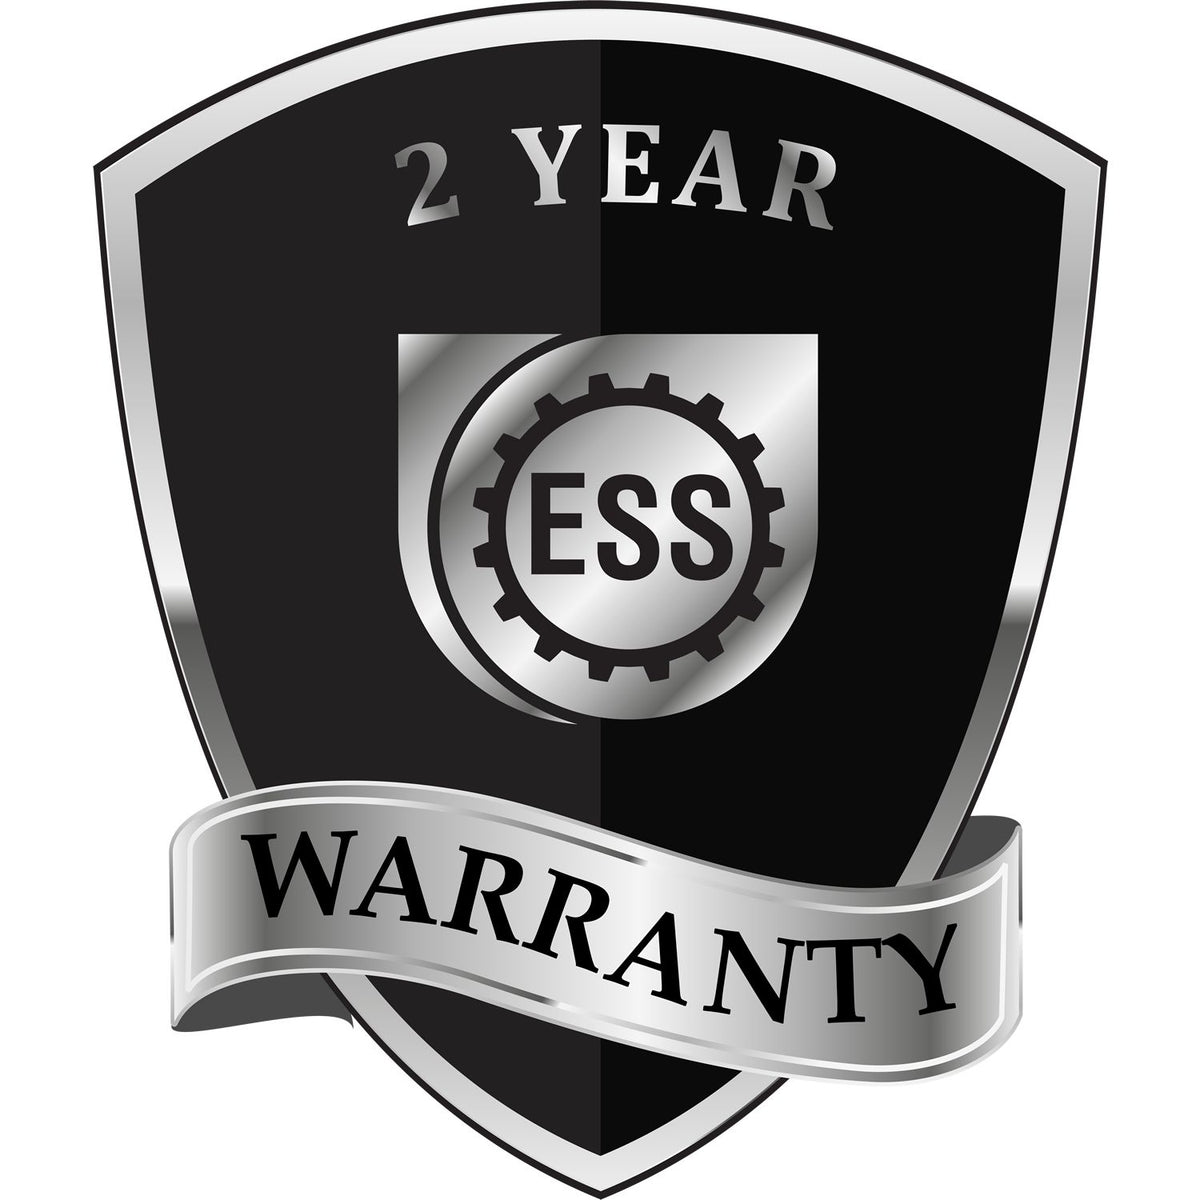 A badge or emblem showing a warranty icon for the Long Reach Wyoming PE Seal